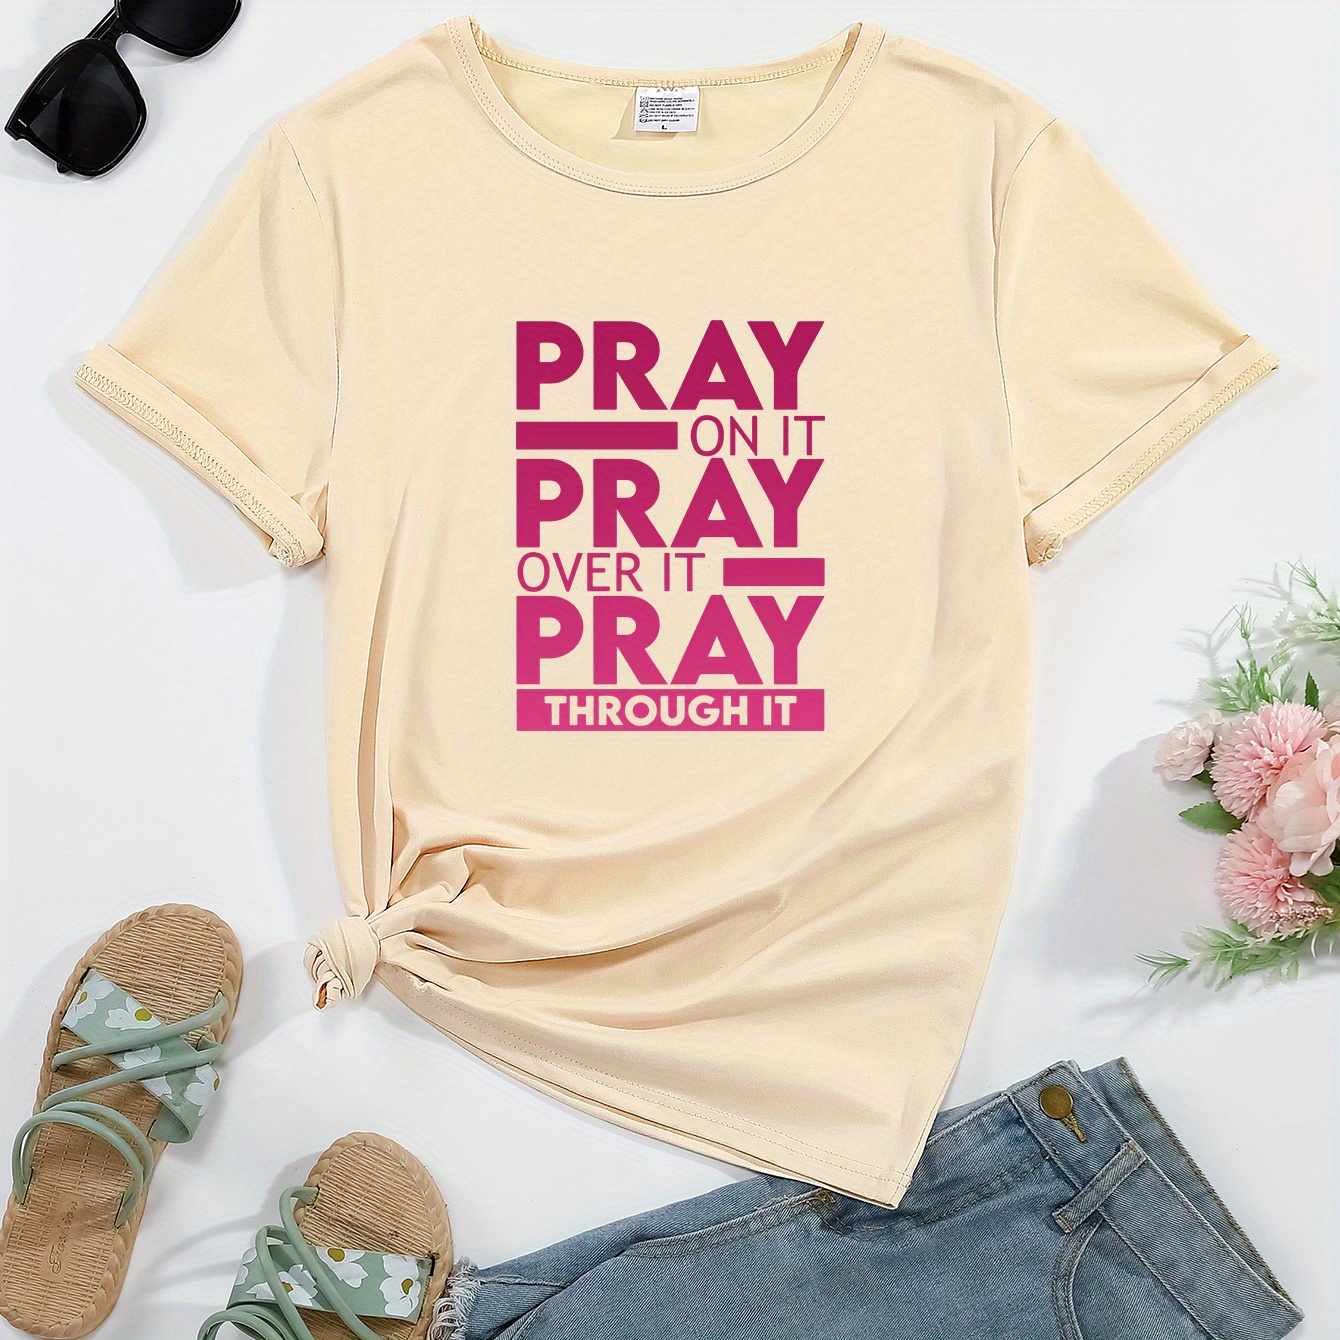 

Women's Printed T-shirt, Casual Style, "pray" Graphic Tee, Round Neck, Short Sleeve, Comfort Fit, Inspirational Fashion Top,